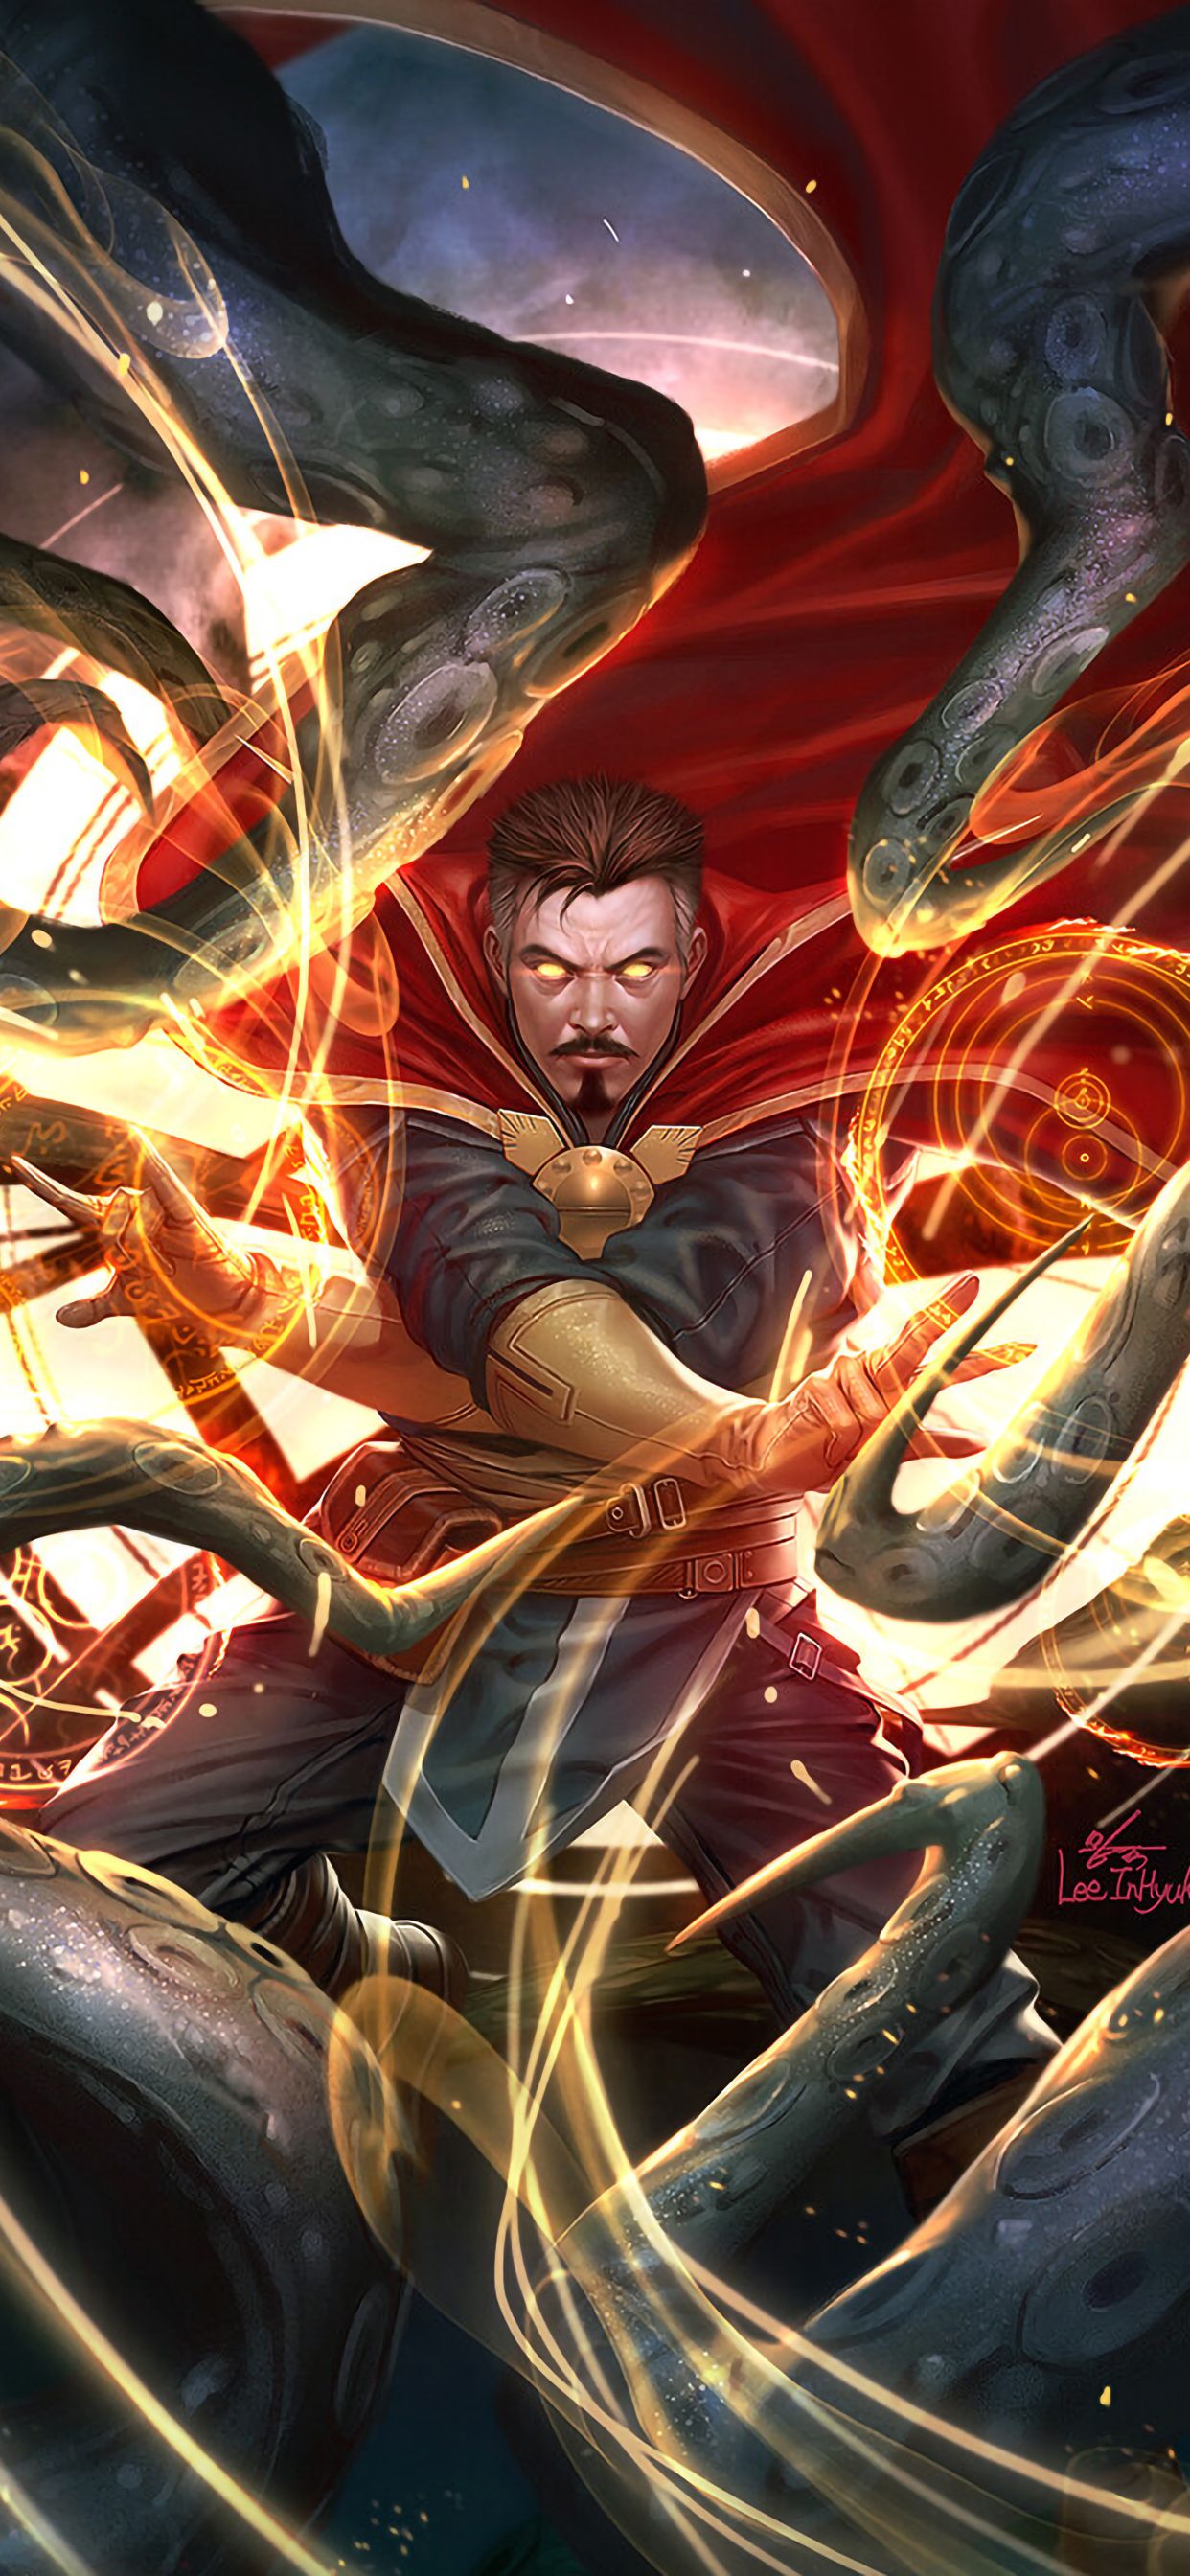 Doctor Strange Multiverse Art iPhone XS MAX Wallpaper, HD Superheroes 4K Wallpaper, Image, Photo and Background